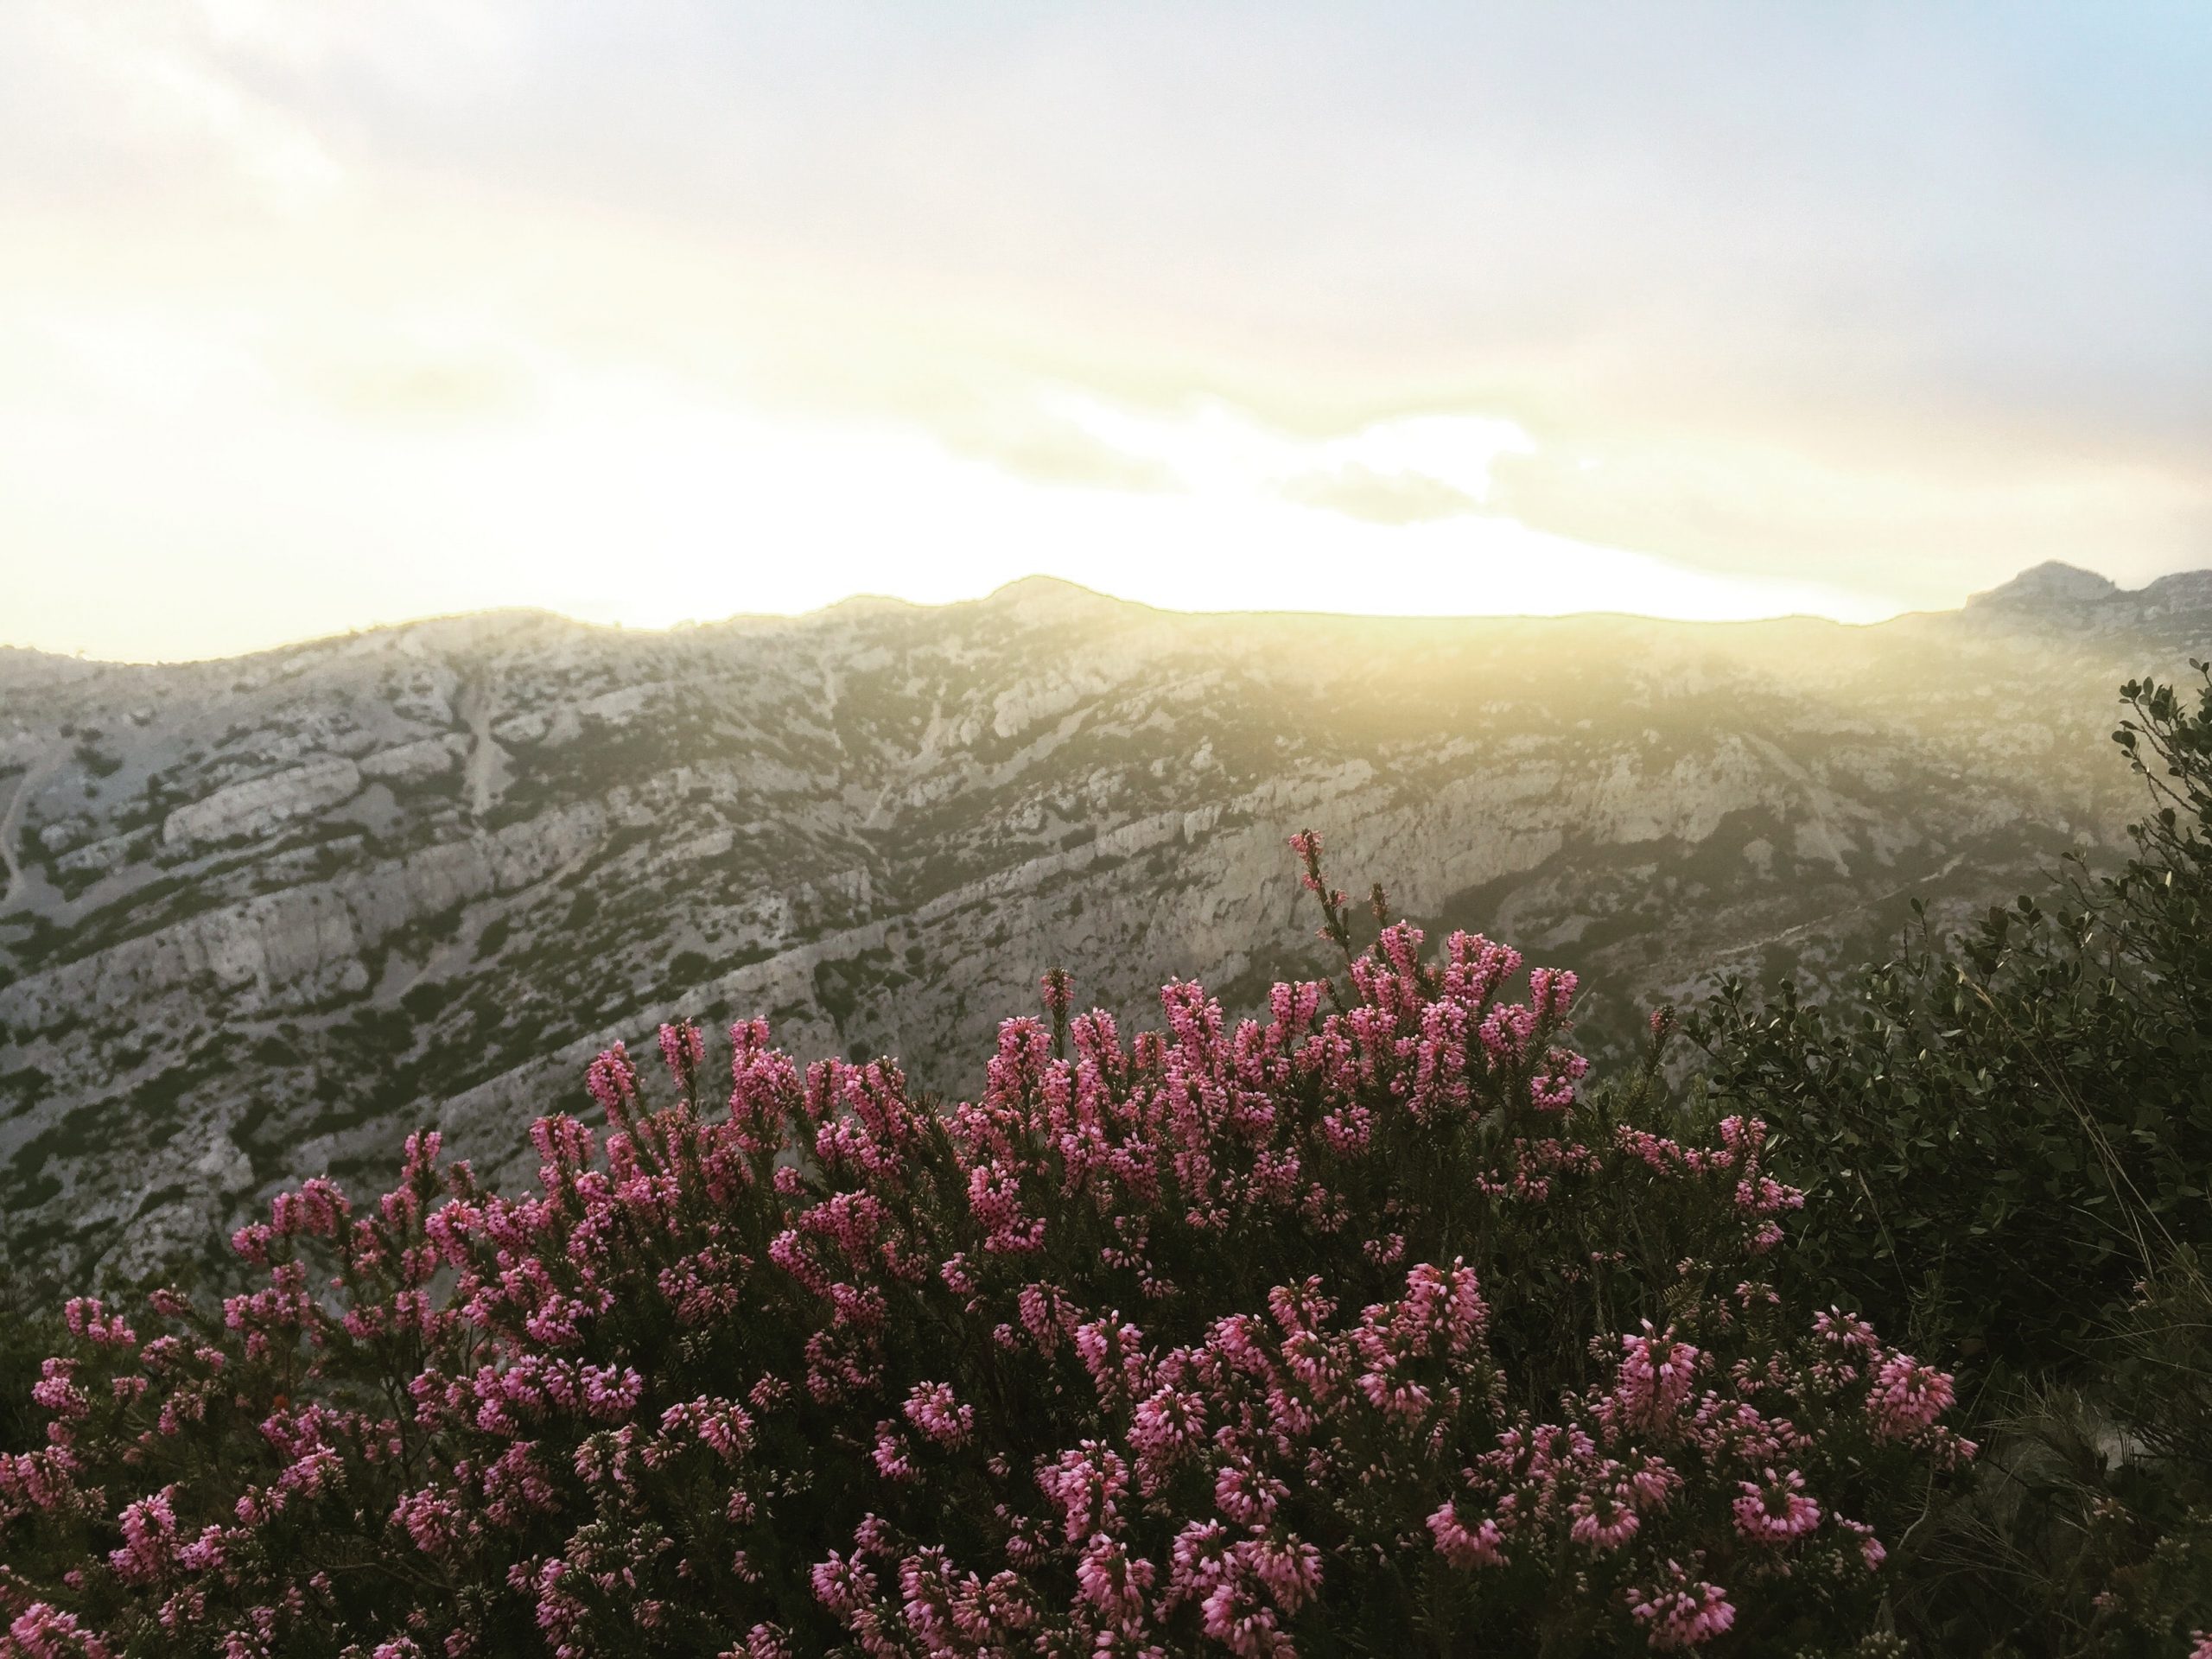 A photograph of a soft yellow sunrise overtop a grey mountainside. Along the bottom of the mountainside, a cluster of deep pink wildflowers grow. The sky is a pale blue-pink and is filled with gentle sunshine.